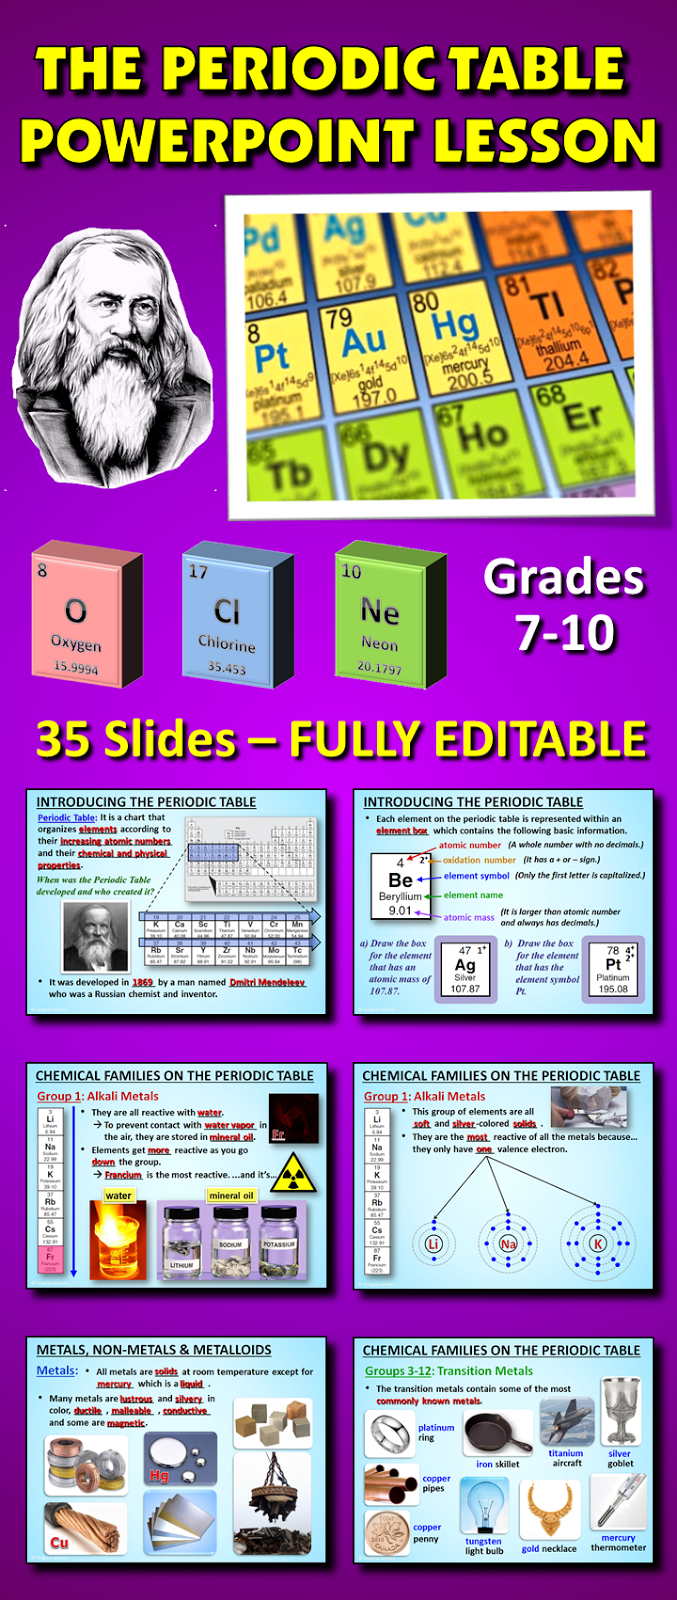 PERIODIC TABLE POWERPOINT